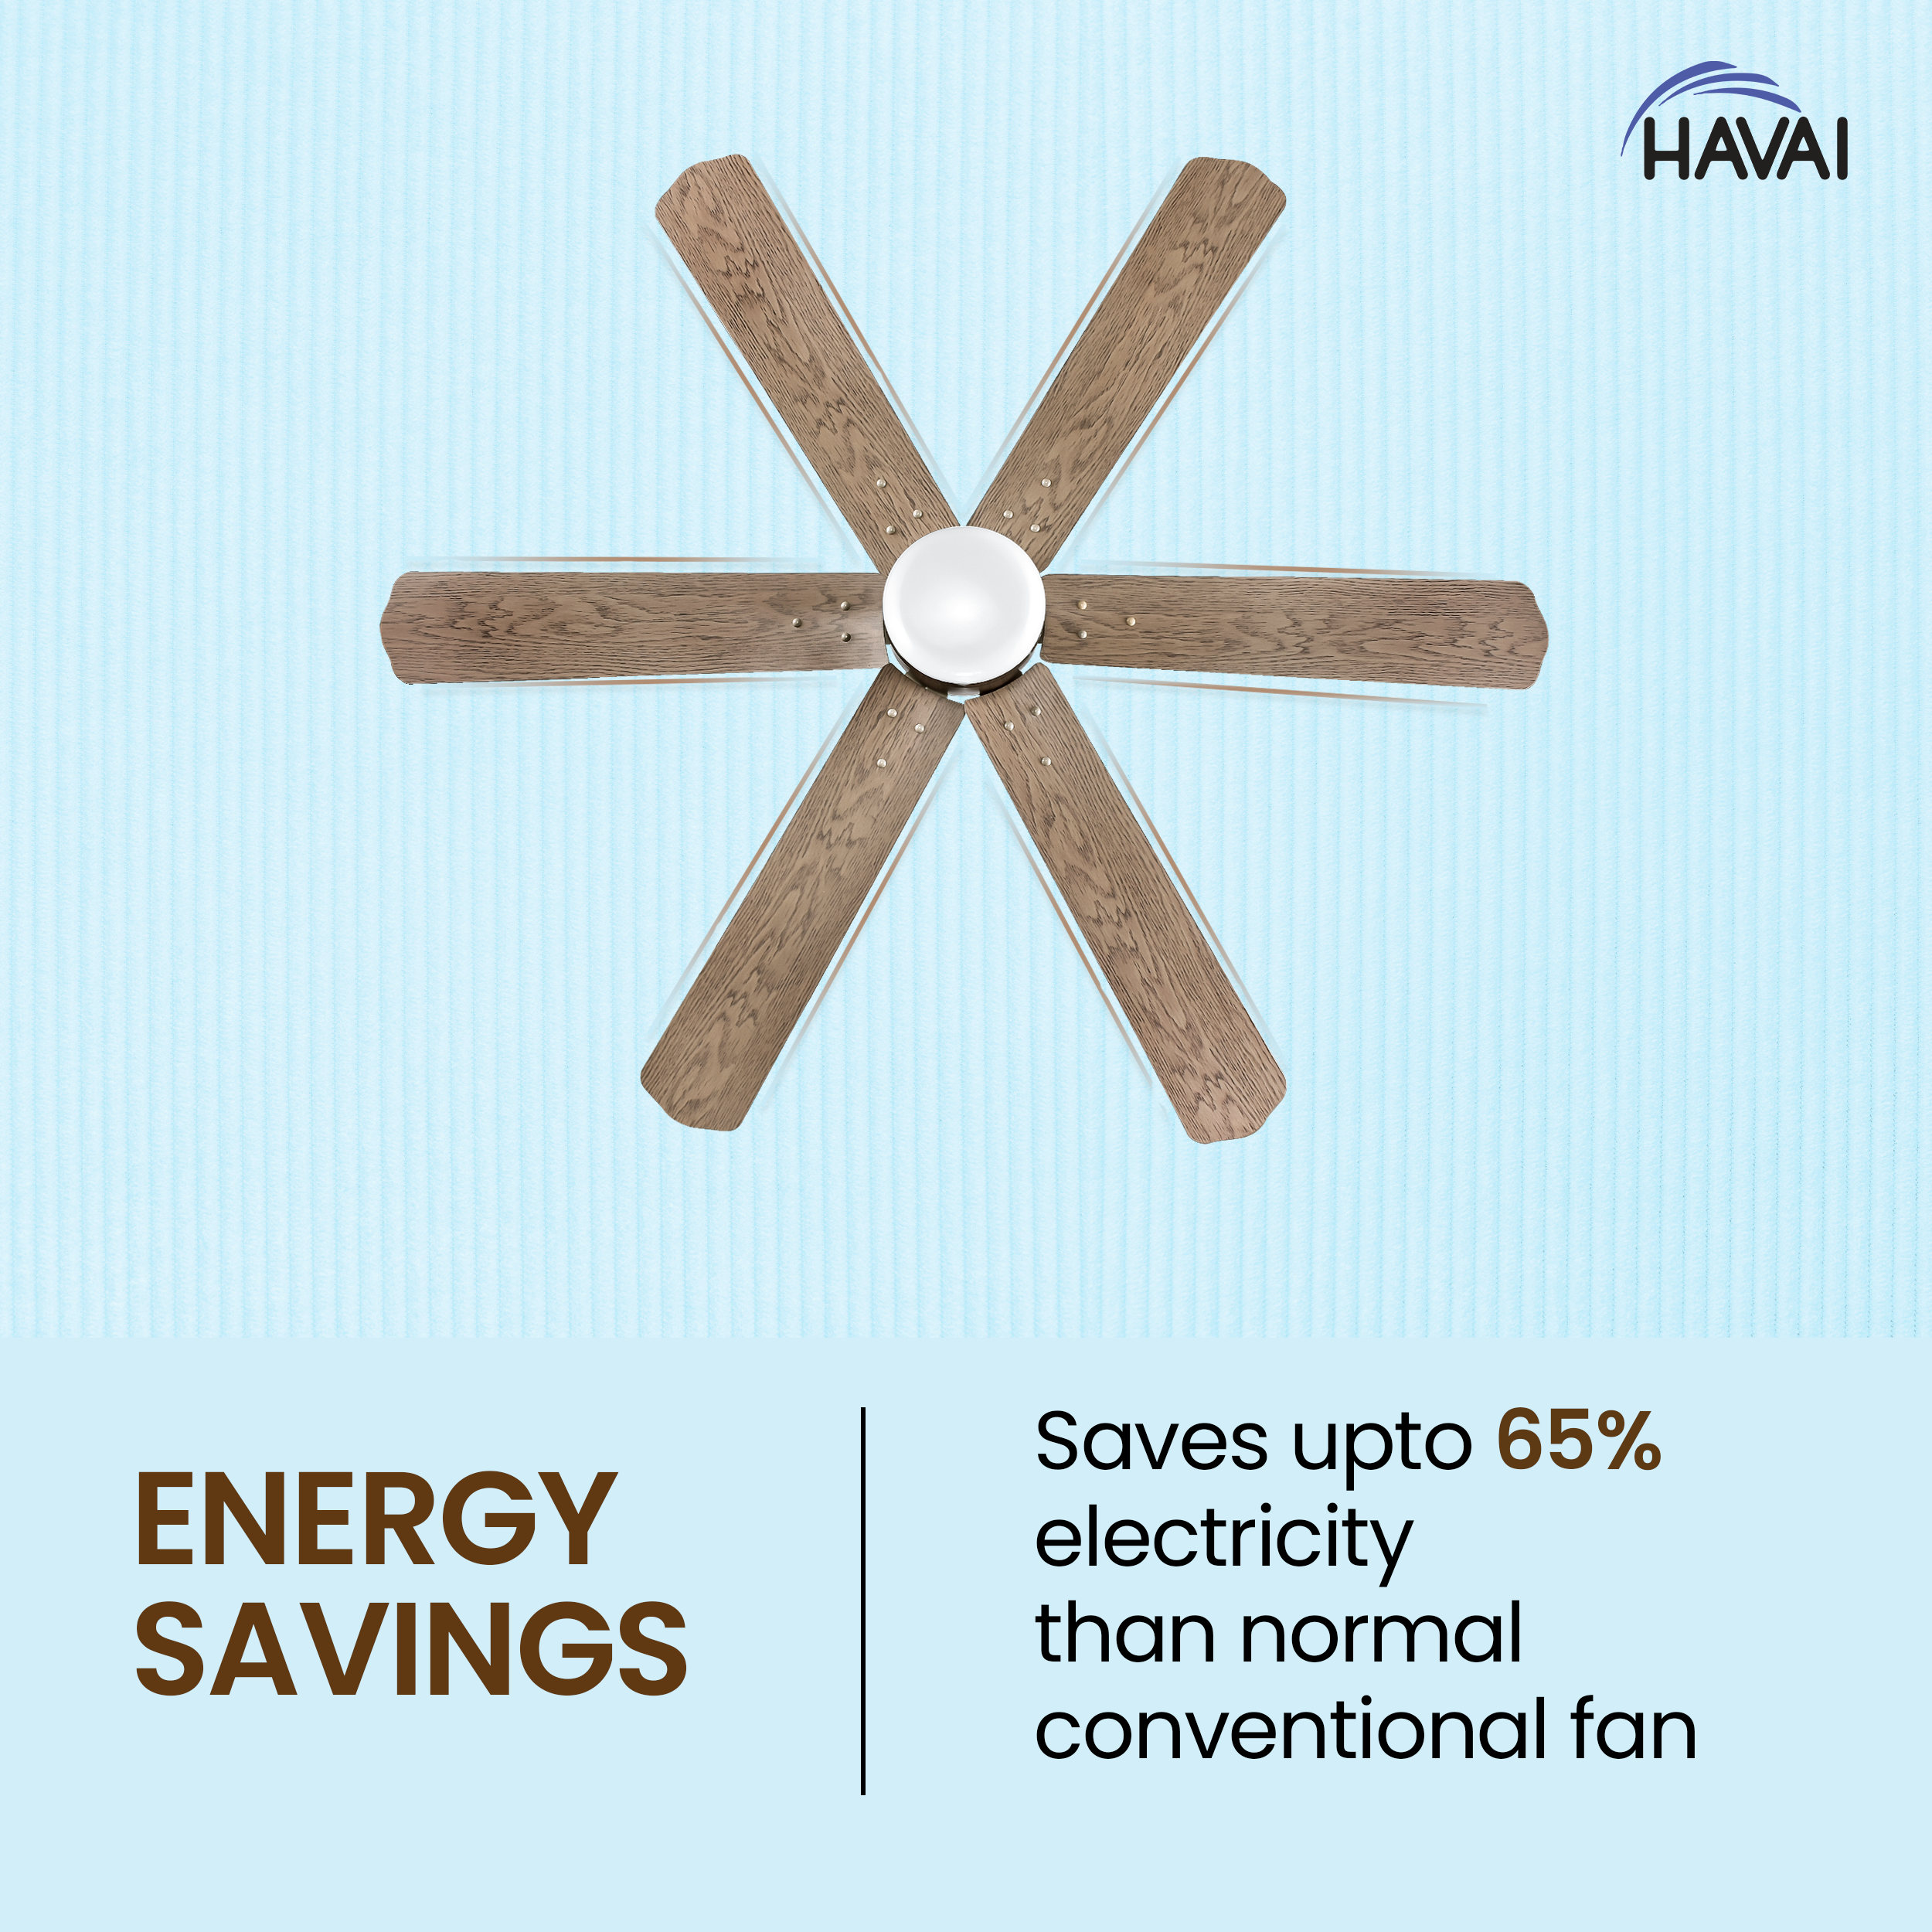 HAVAI Pristine Wooden Range BLDC Ceiling Fan - 6 Blades - 35W, Ashwood 1200mm Blade with Remote (WHITE 0.5 LED)…